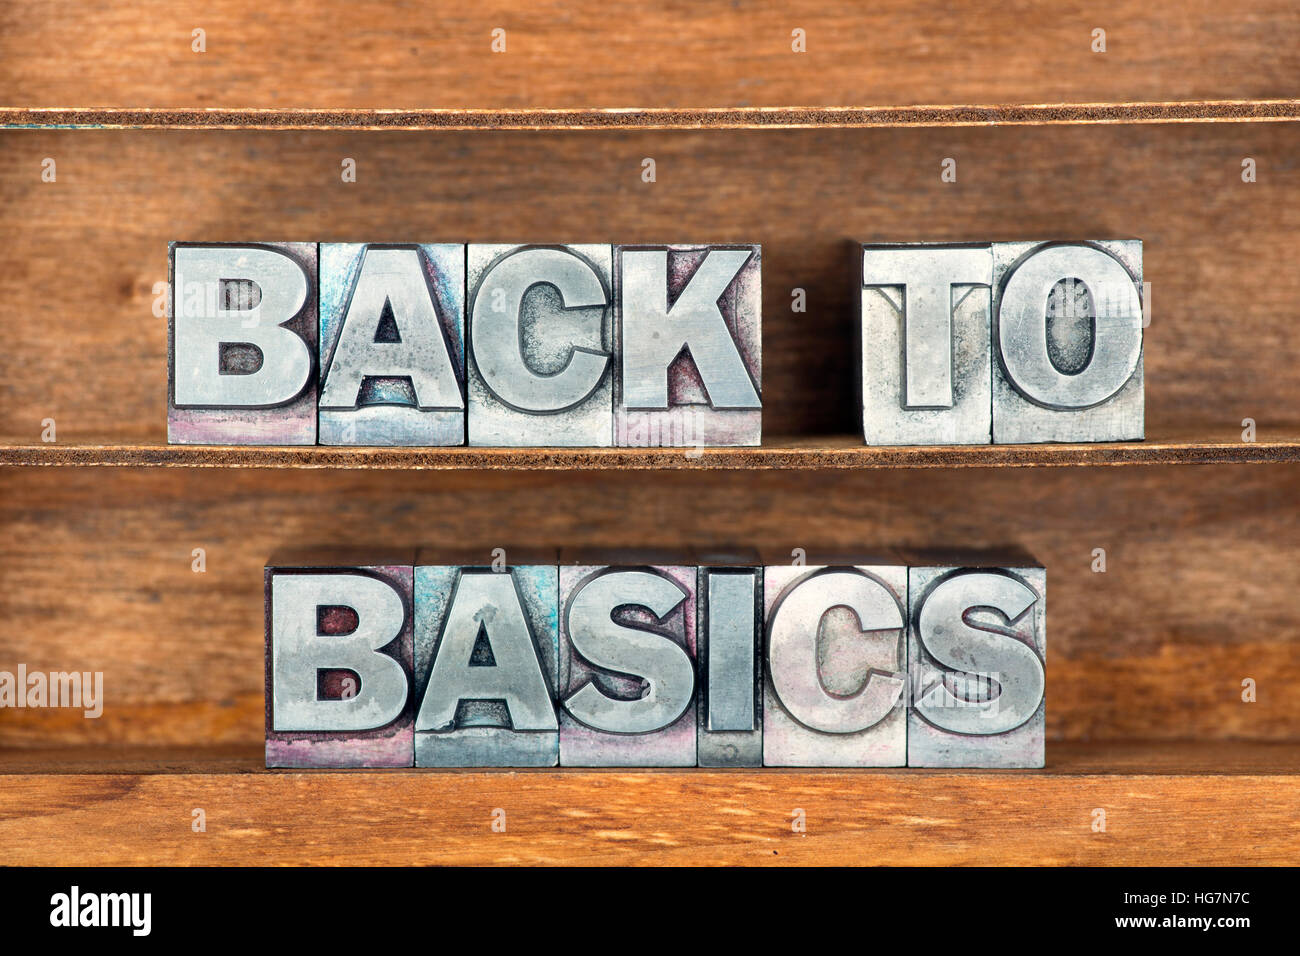 back to basics phrase made from metallic letterpress type on wooden tray Stock Photo